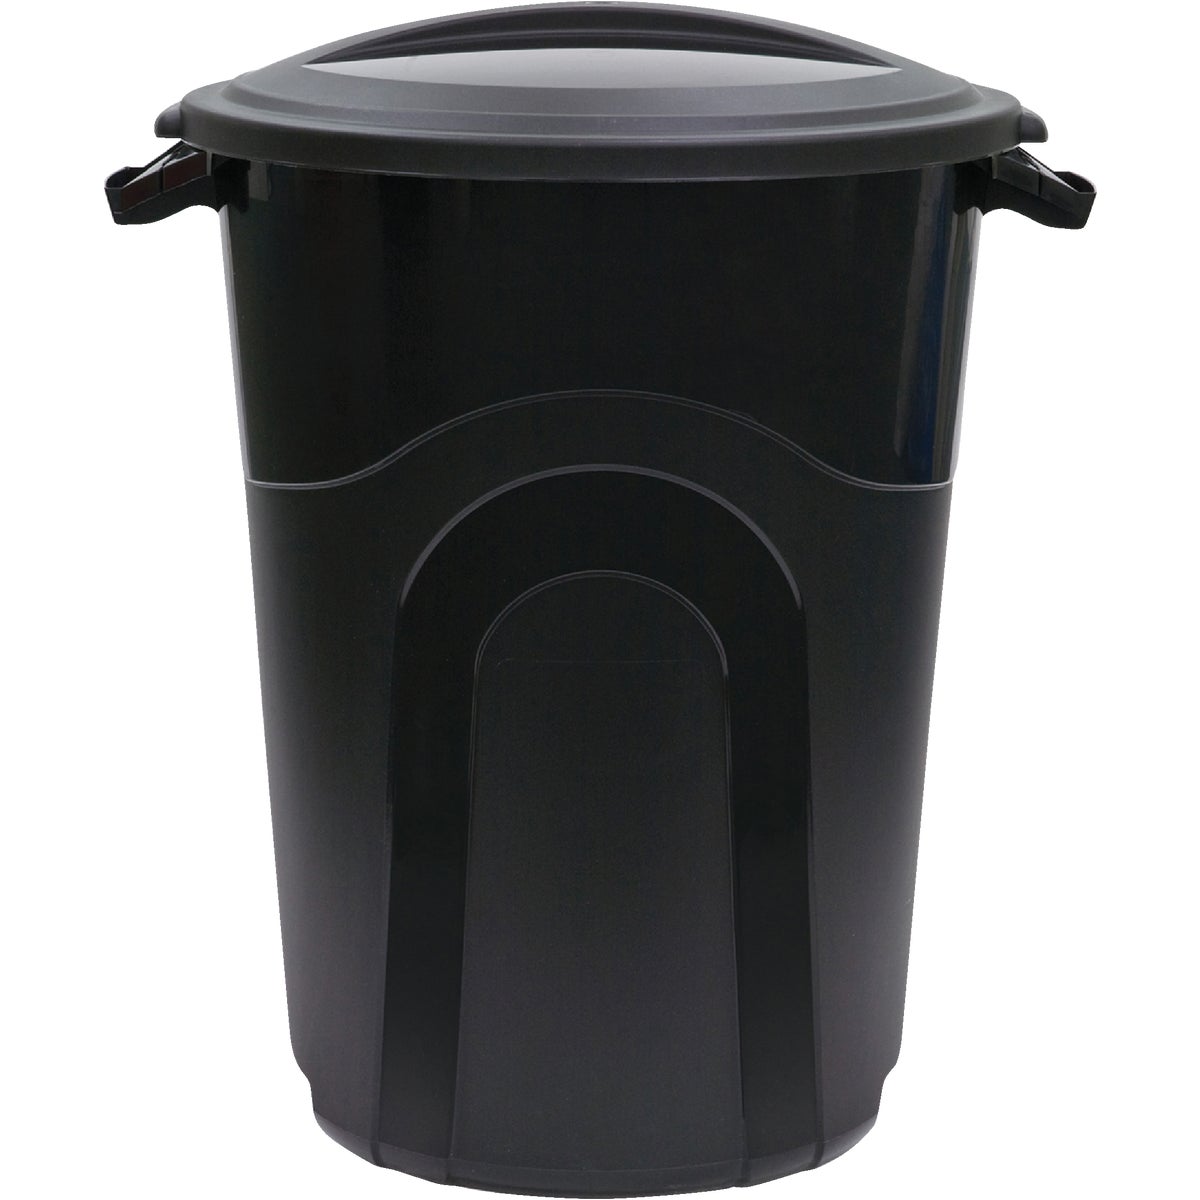 Item 603571, Durable outdoor trash can.